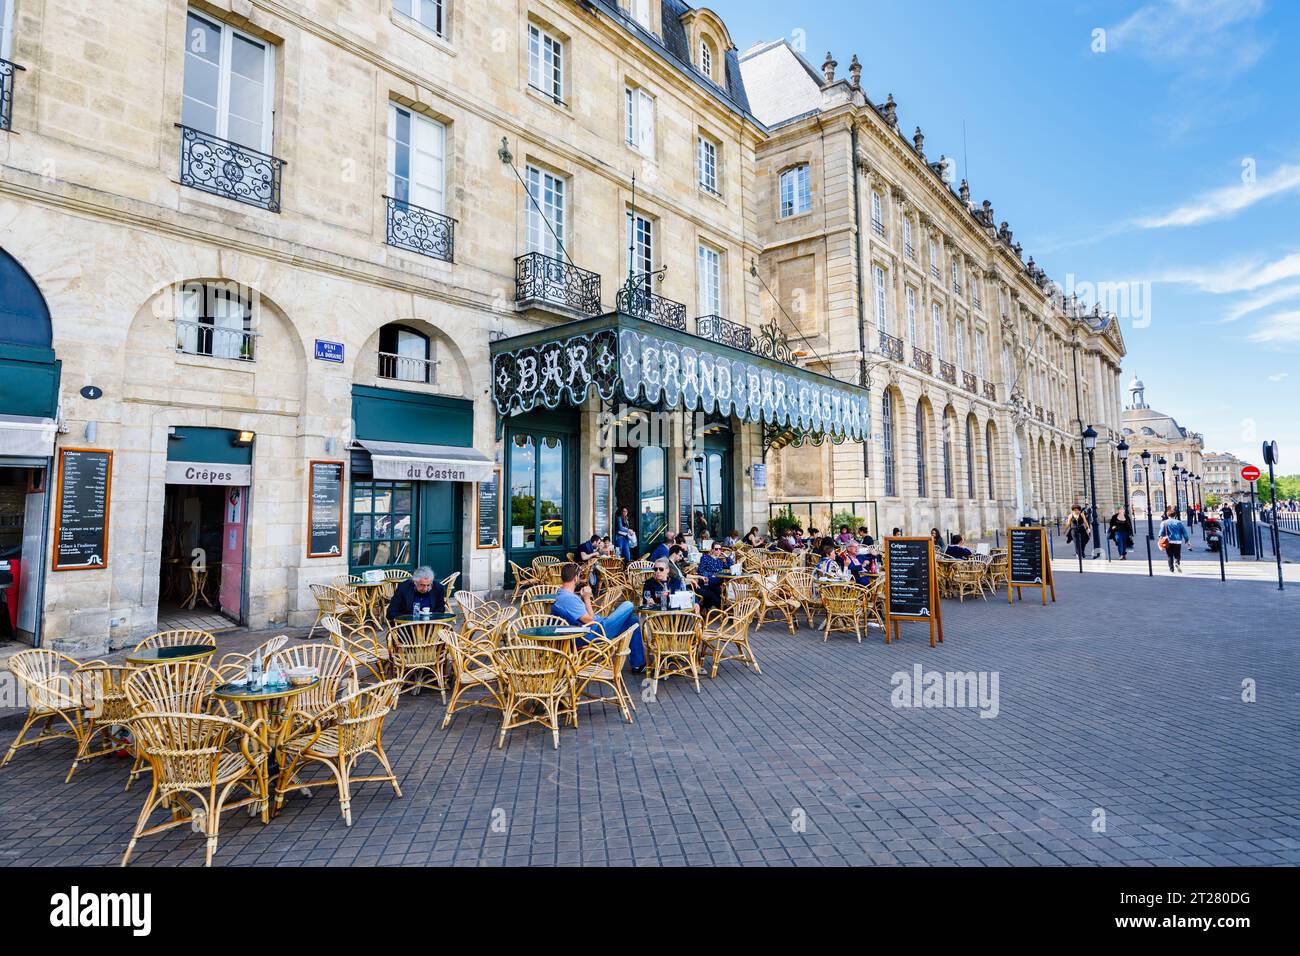 Outdoor dining outside the riverside Grand Bar Castan, one of the oldest cafes  in Bordeaux, a port city on the Garonne River in southwestern France Stock Photo